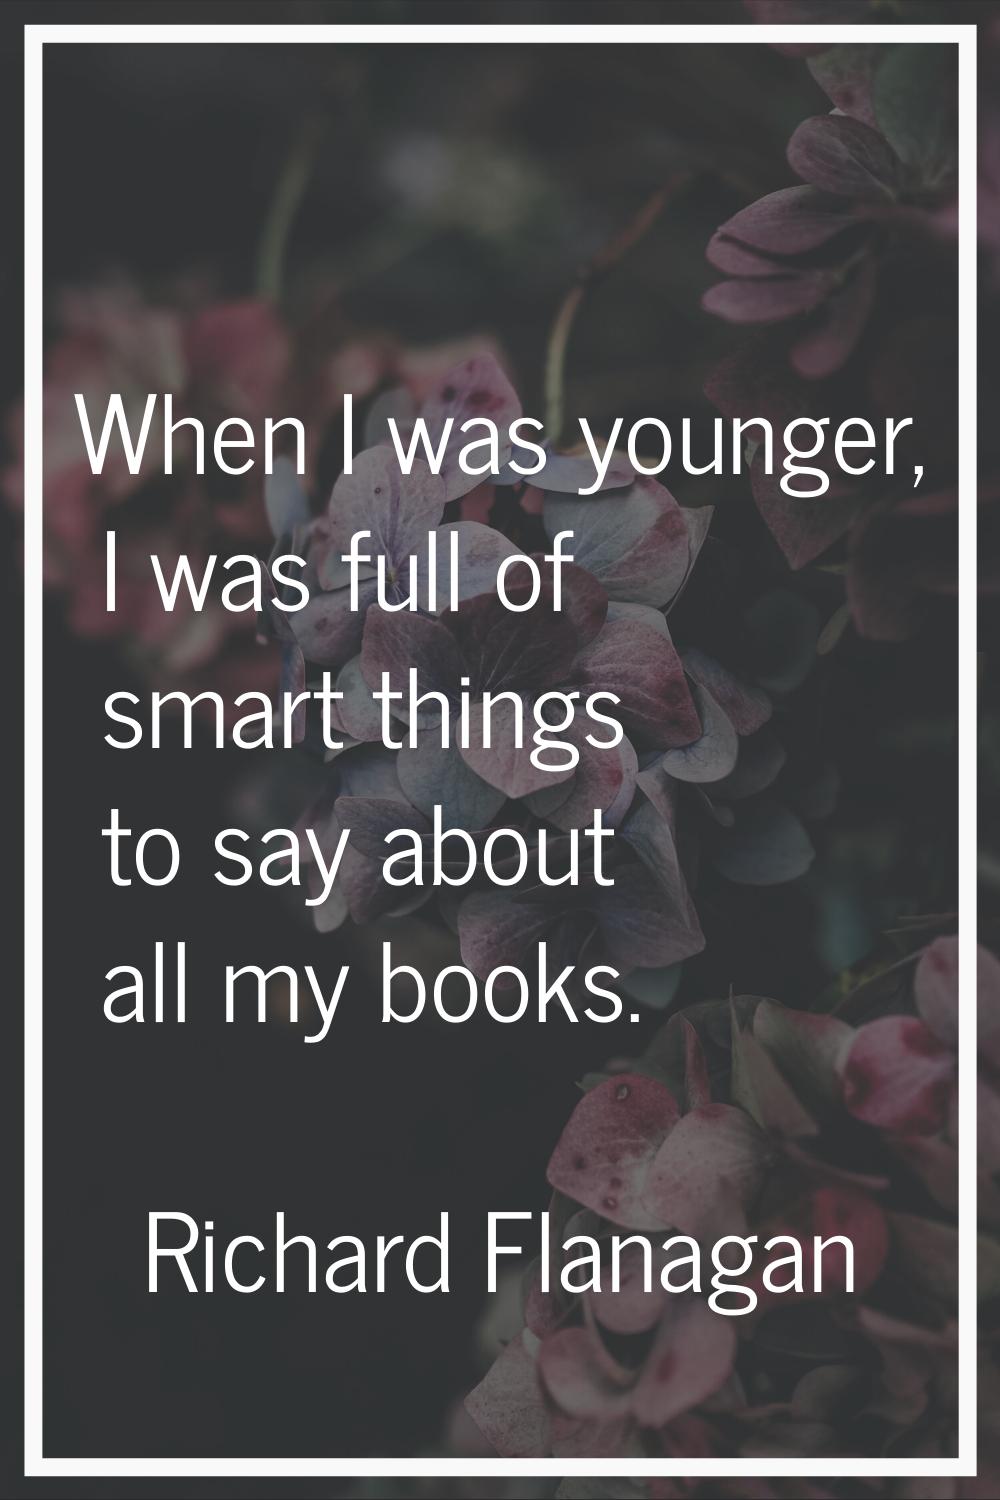 When I was younger, I was full of smart things to say about all my books.